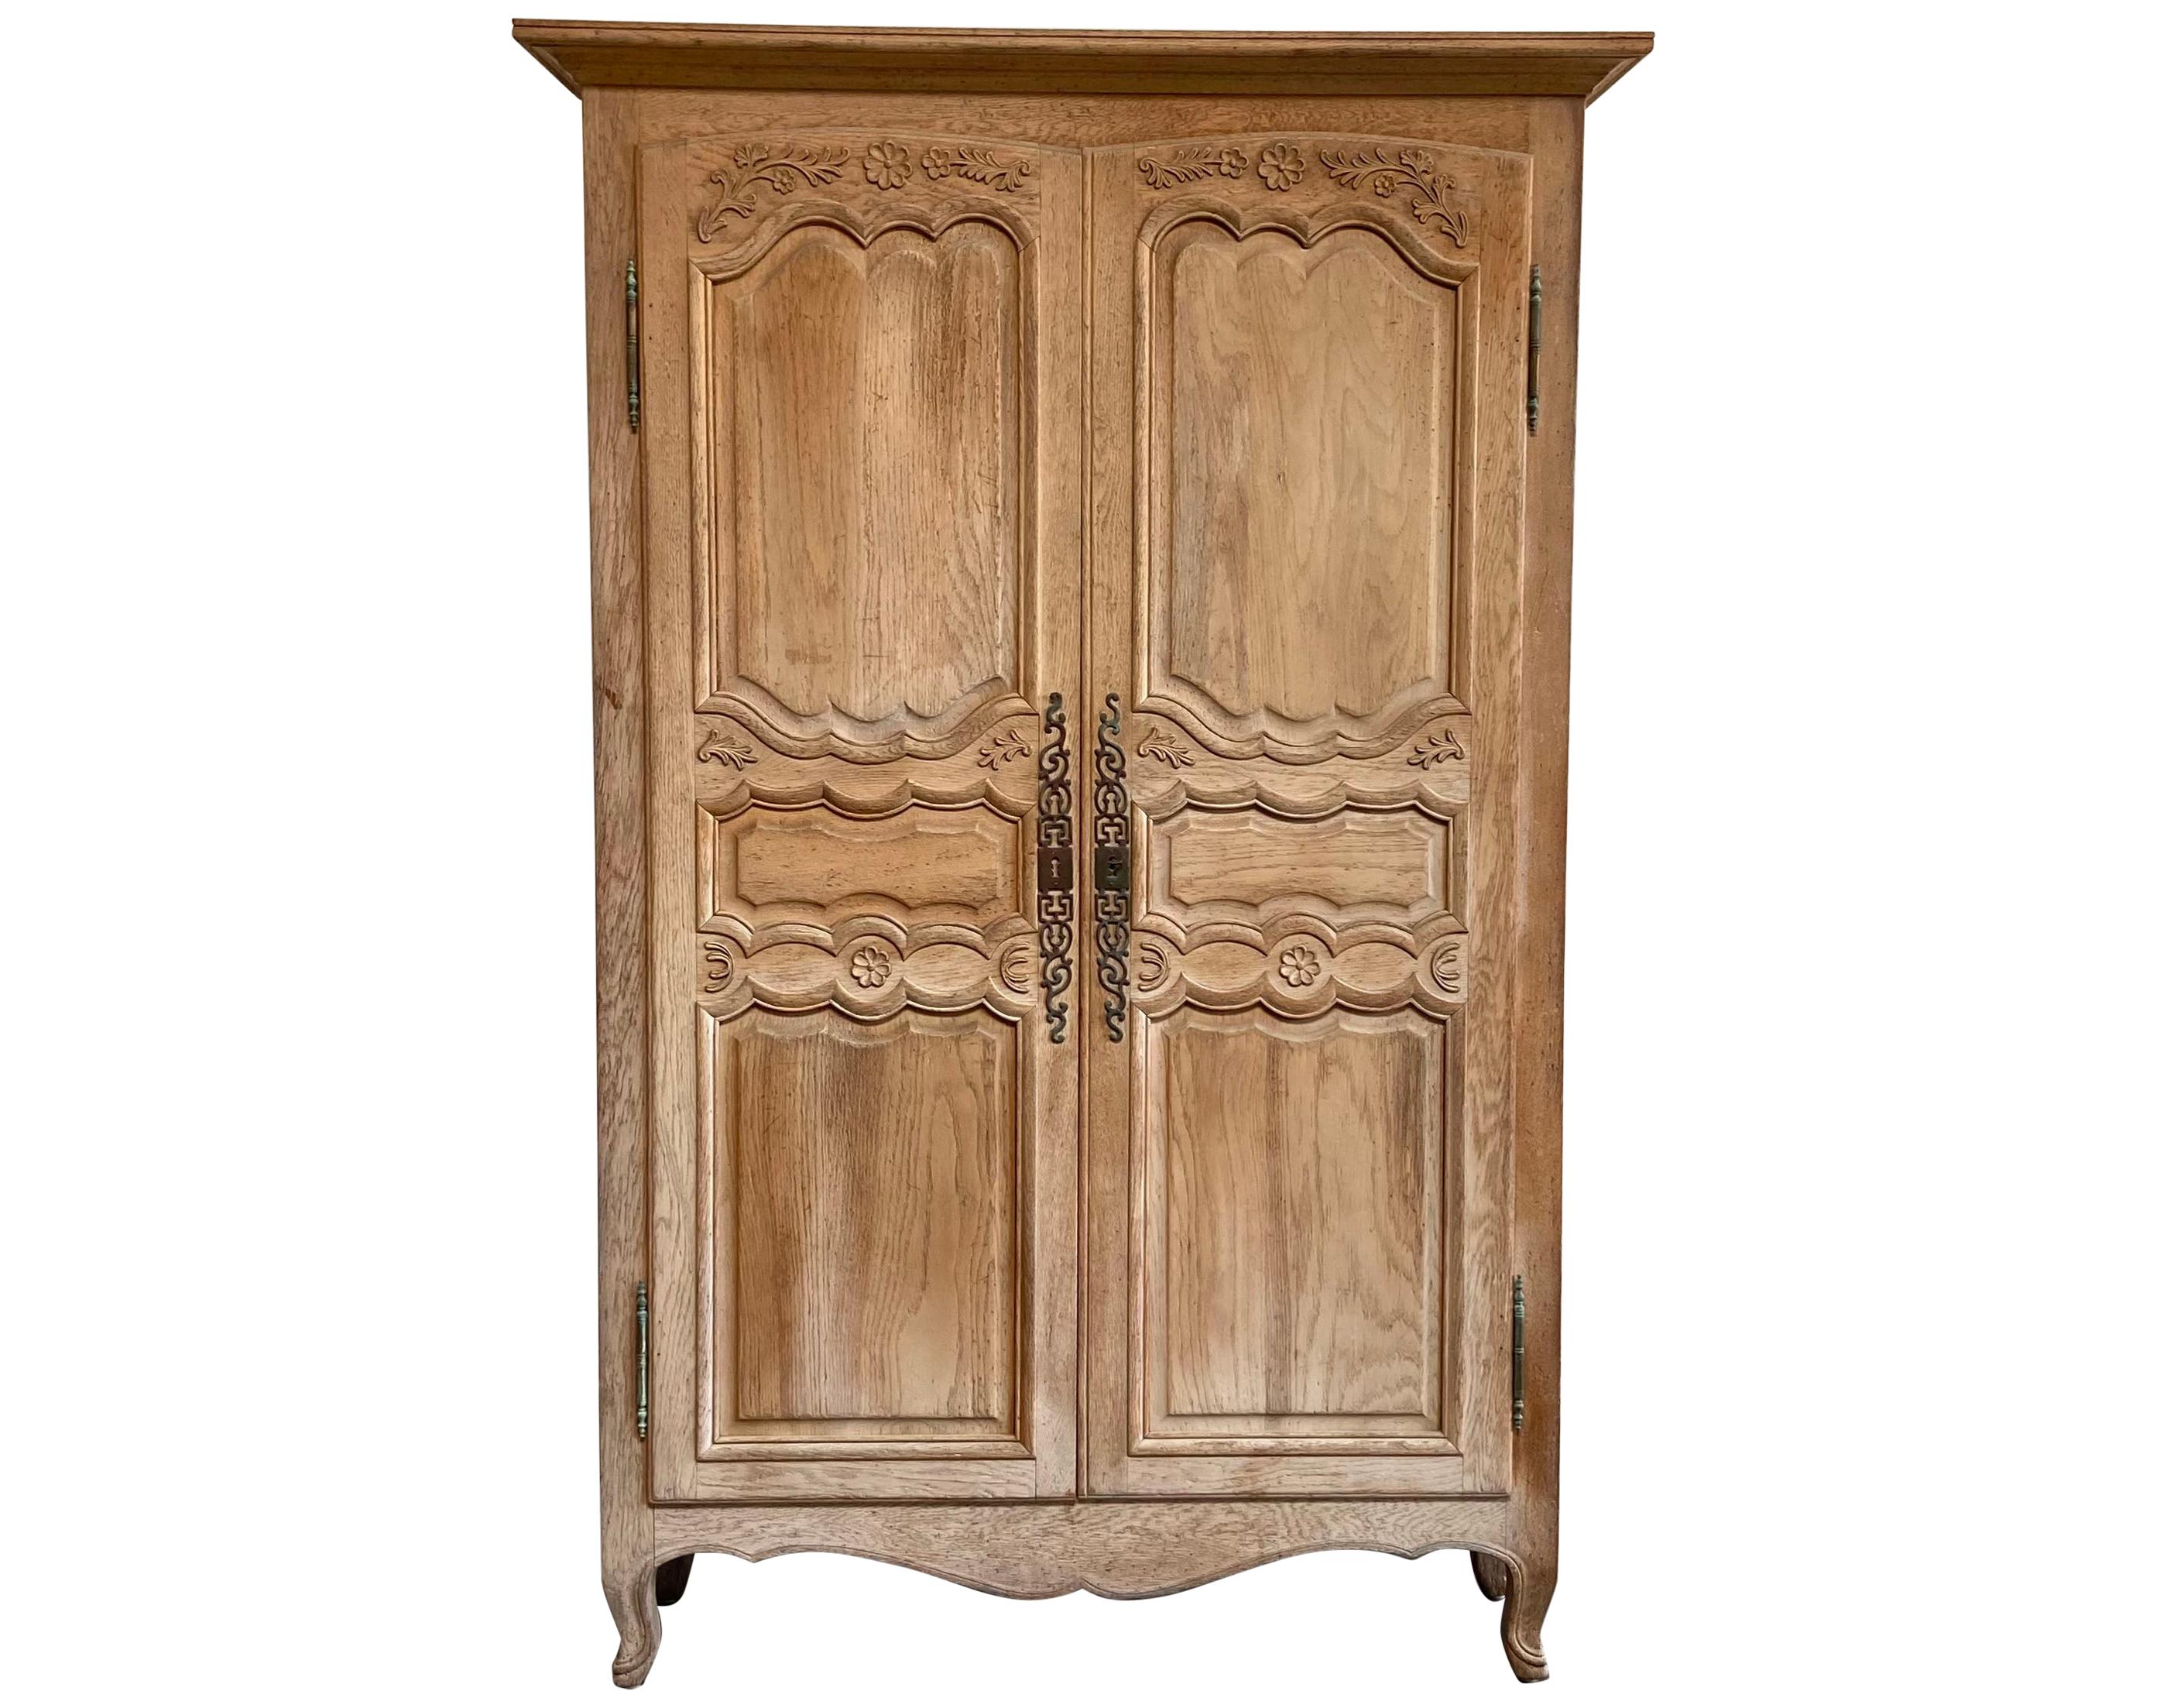 Antique Bleached Oak French Provincial Style Armoire